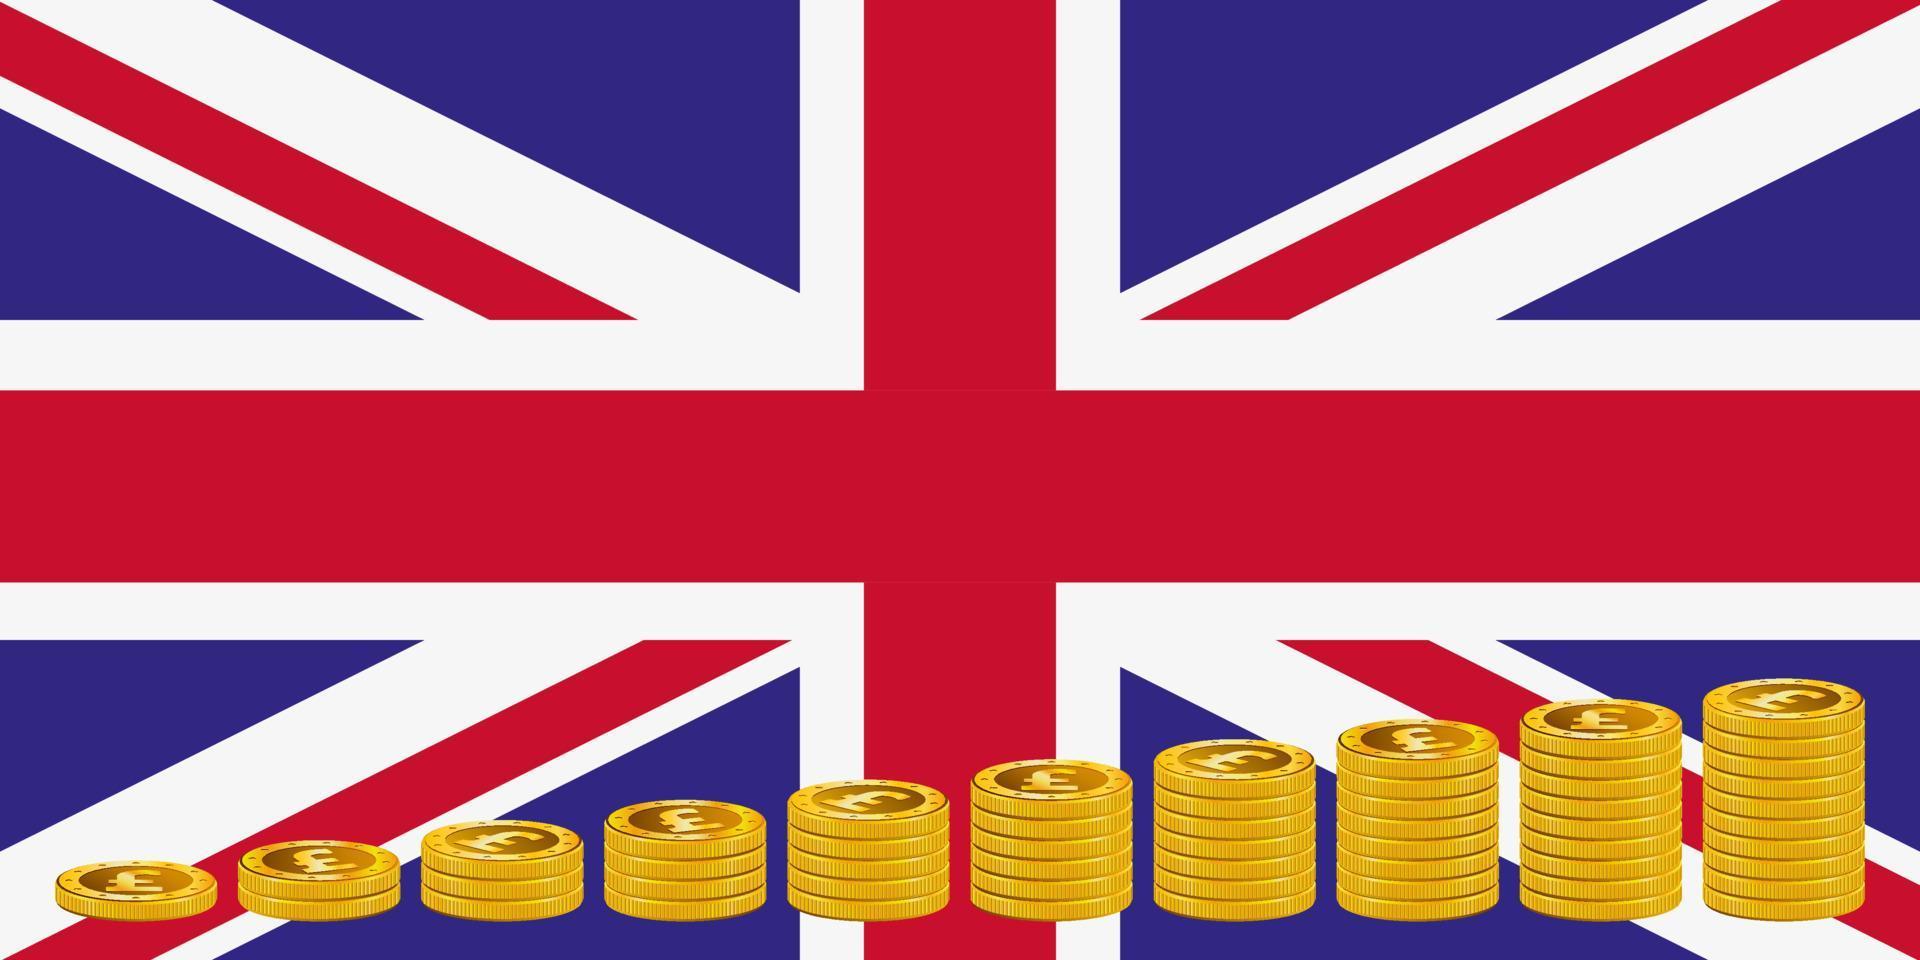 Stacks of golden pound coins on the background of the UK flag. vector